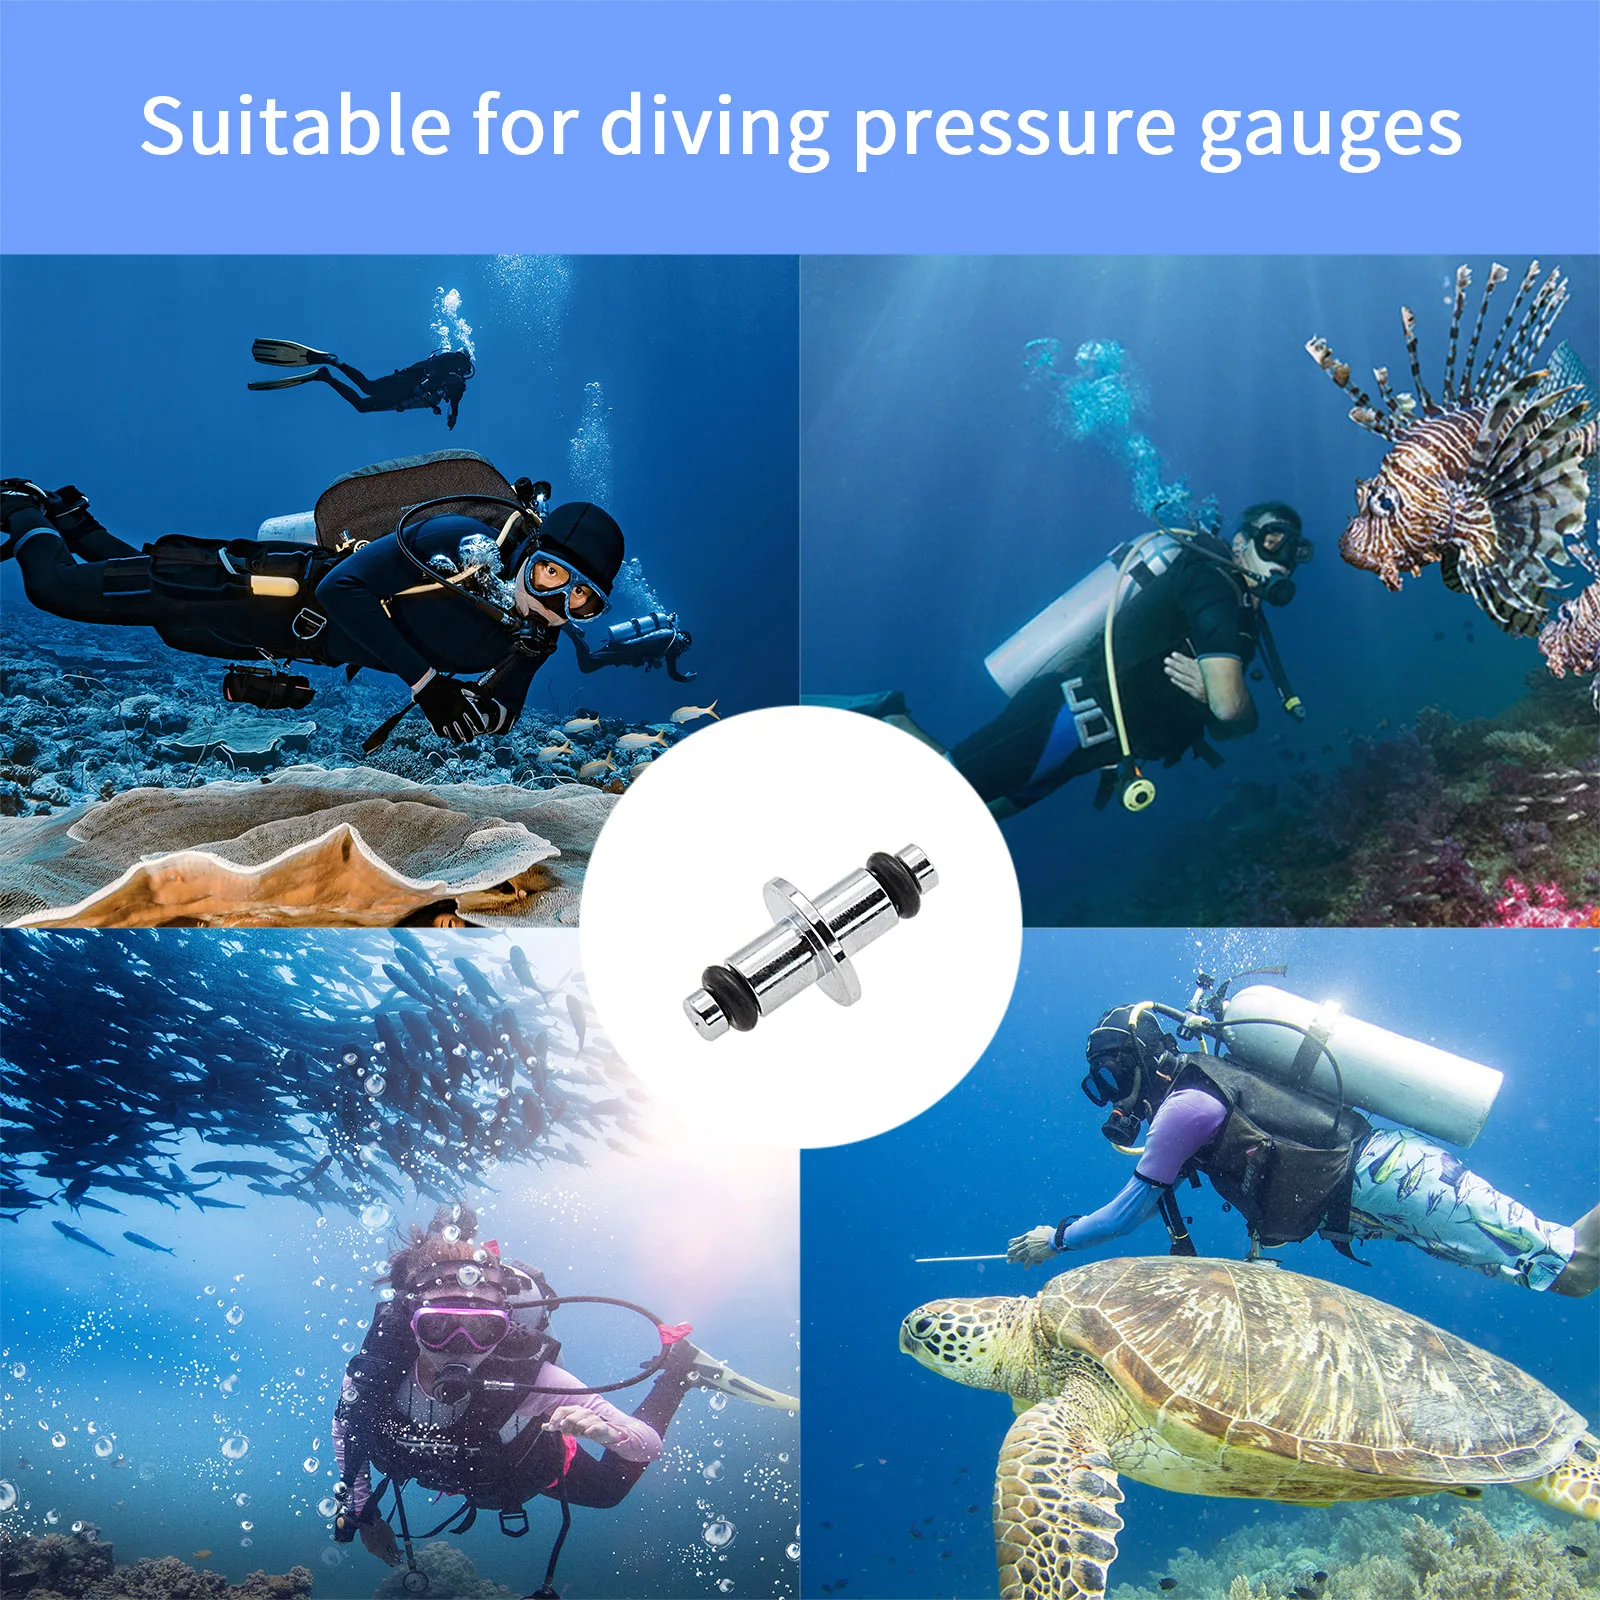 

2021 Pieces High Pressure Swivel Spools with O-Rings Spindle Scuba Dive Diving Divers Gauge Gear Accessories